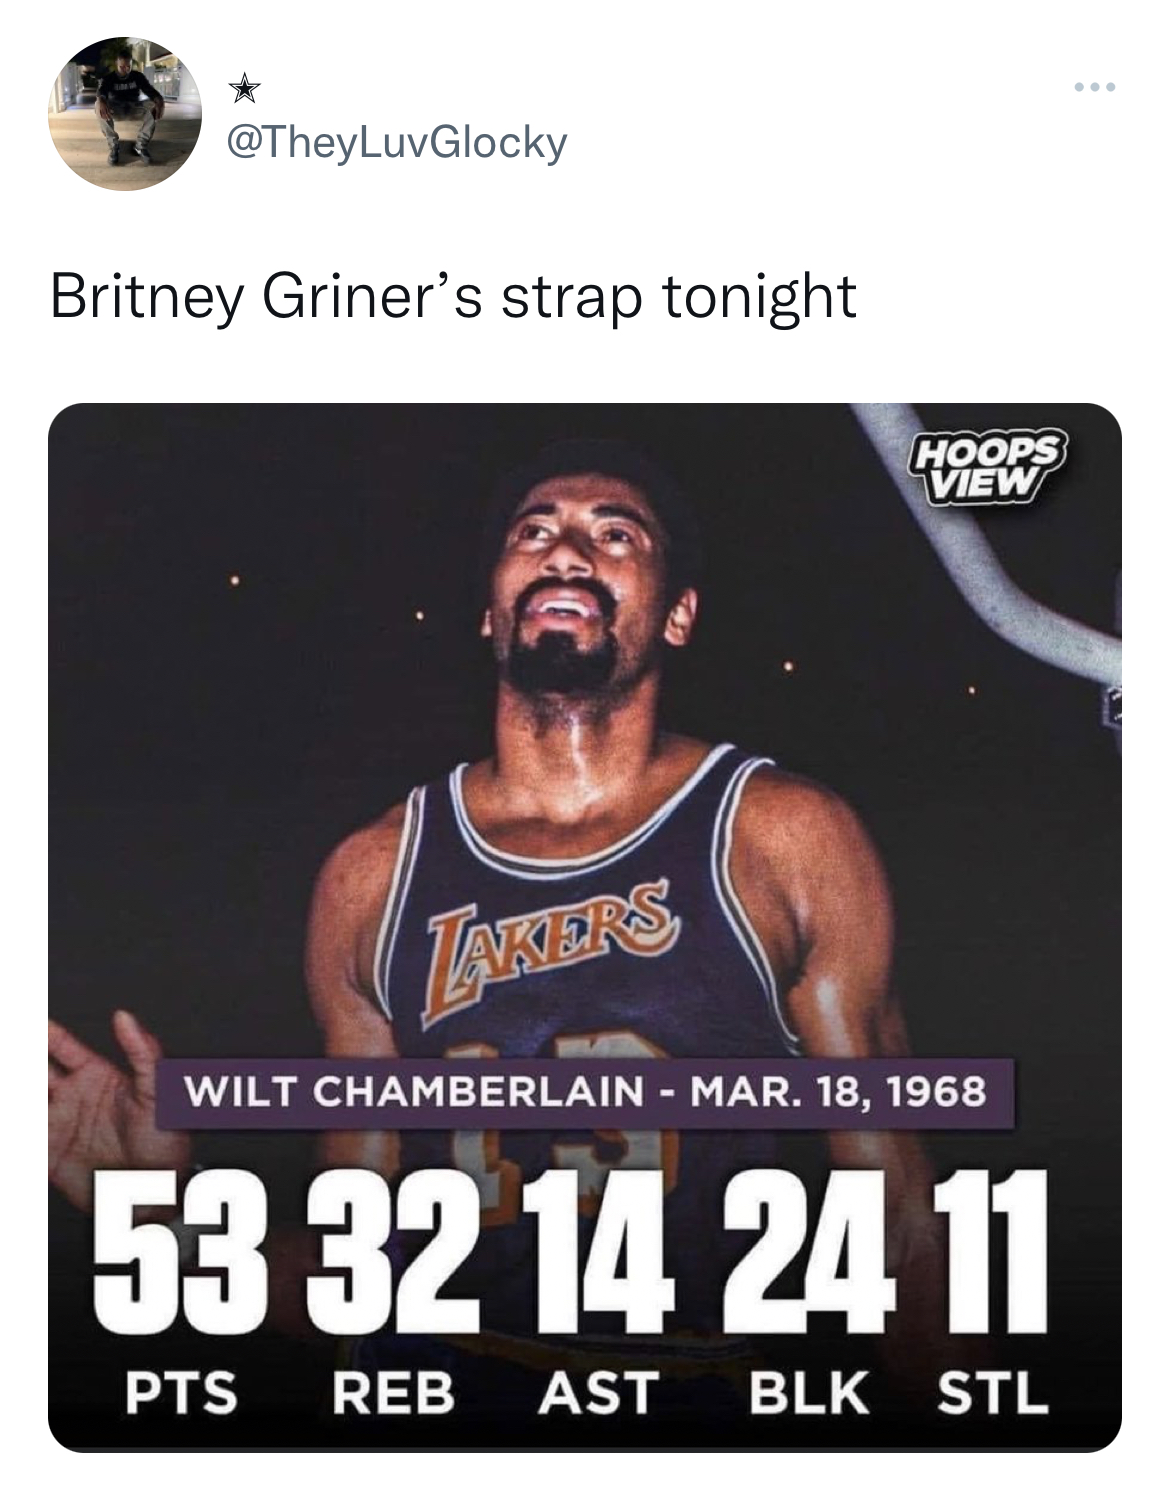 Brittney Griner Reactions - basketball player - Britney Griner's strap tonight Takers Hoops View Wilt Chamberlain Mar. 18, 1968 53 32 14 24 11 Pts Reb Ast Blk Stl